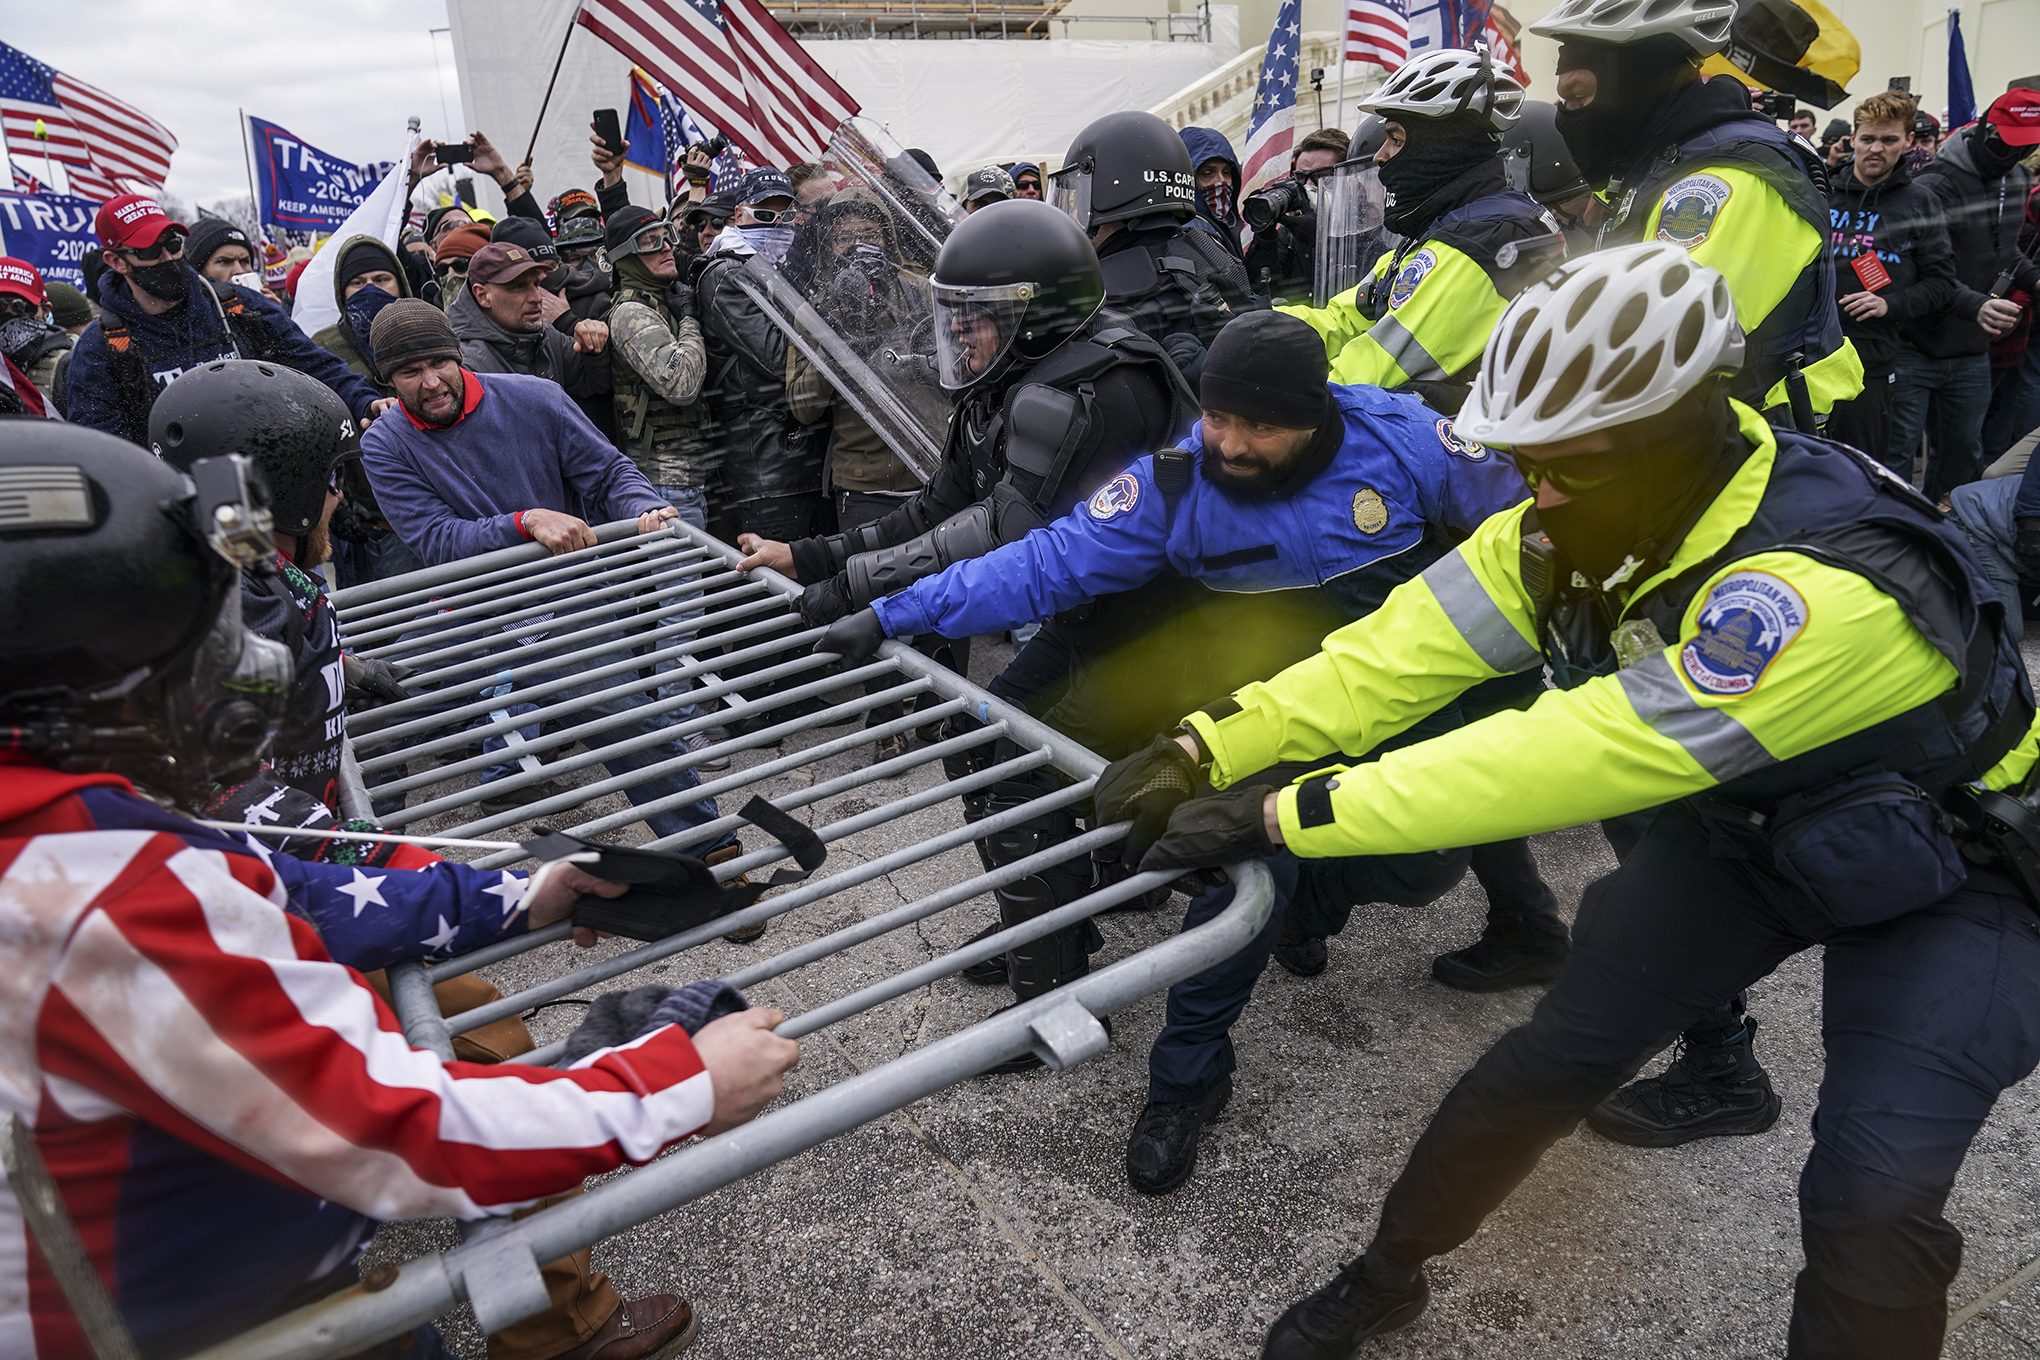 Trump supporters try to break through a police barrier on January 6